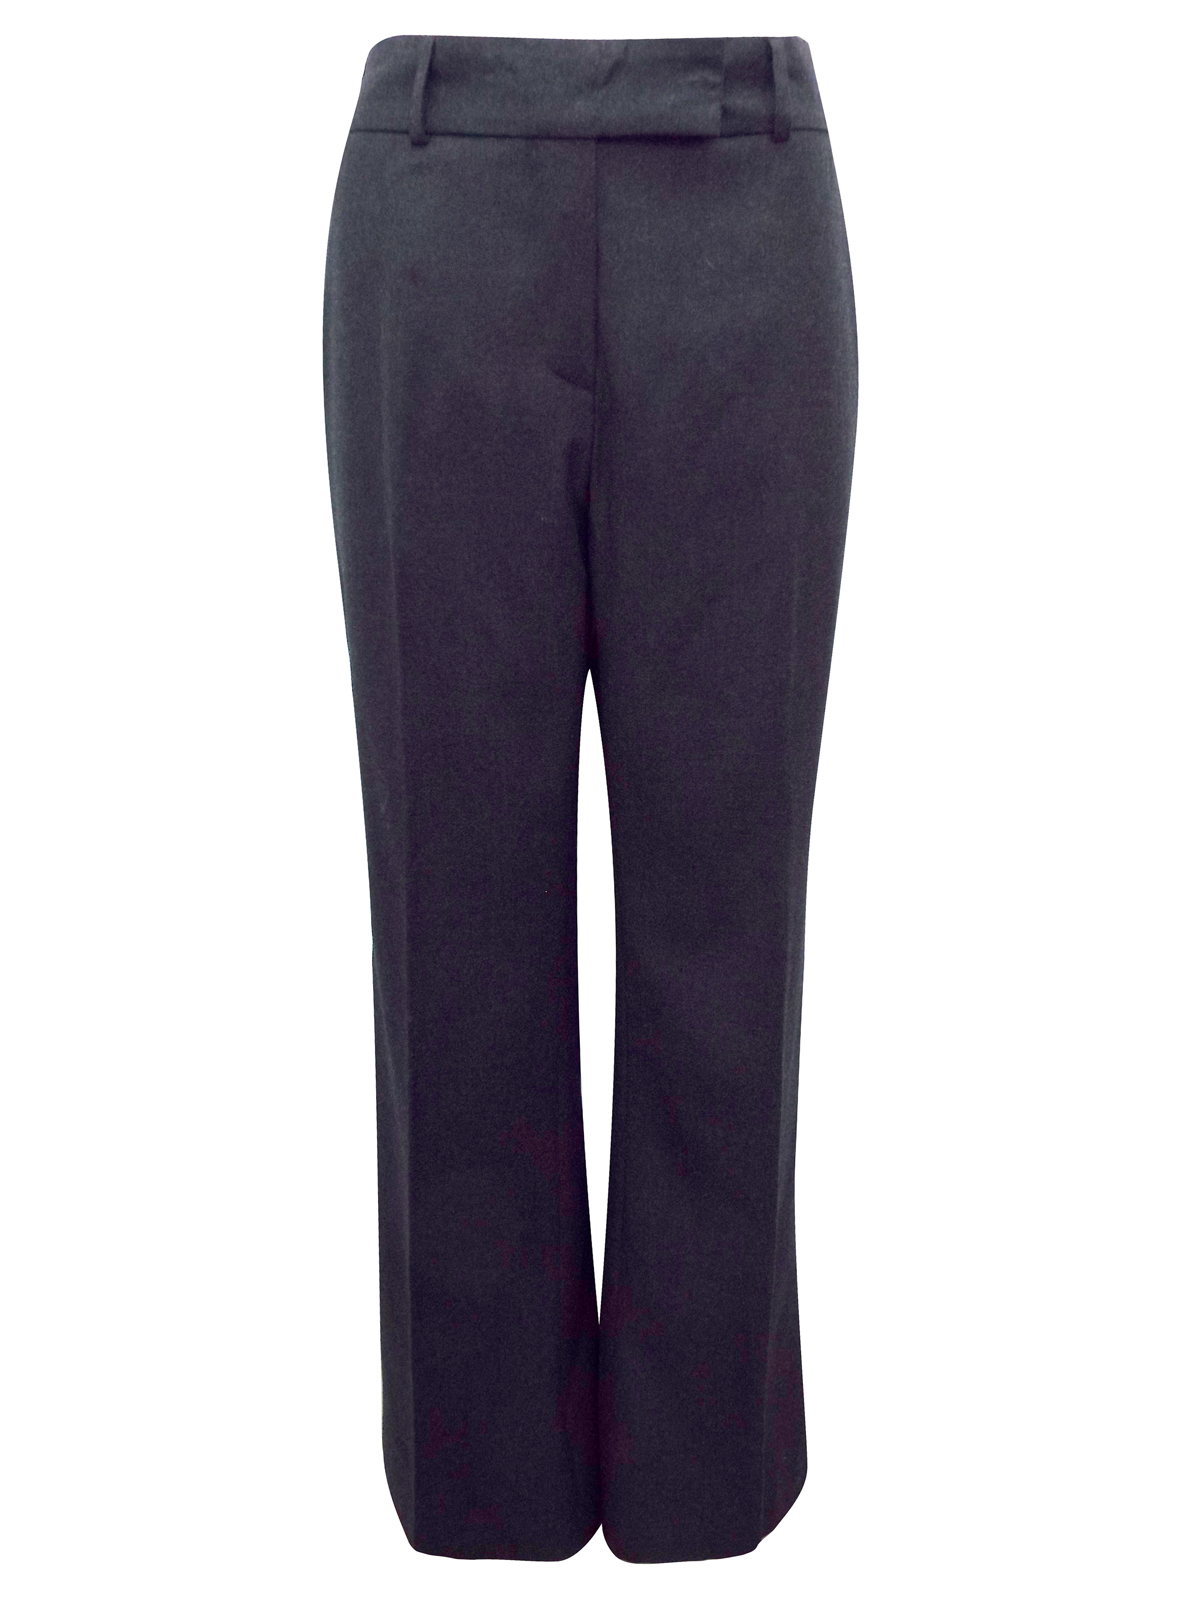 Marks and Spencer - - M&5 GREY Pure Wool Wide Leg Trousers - Size 6 to 18